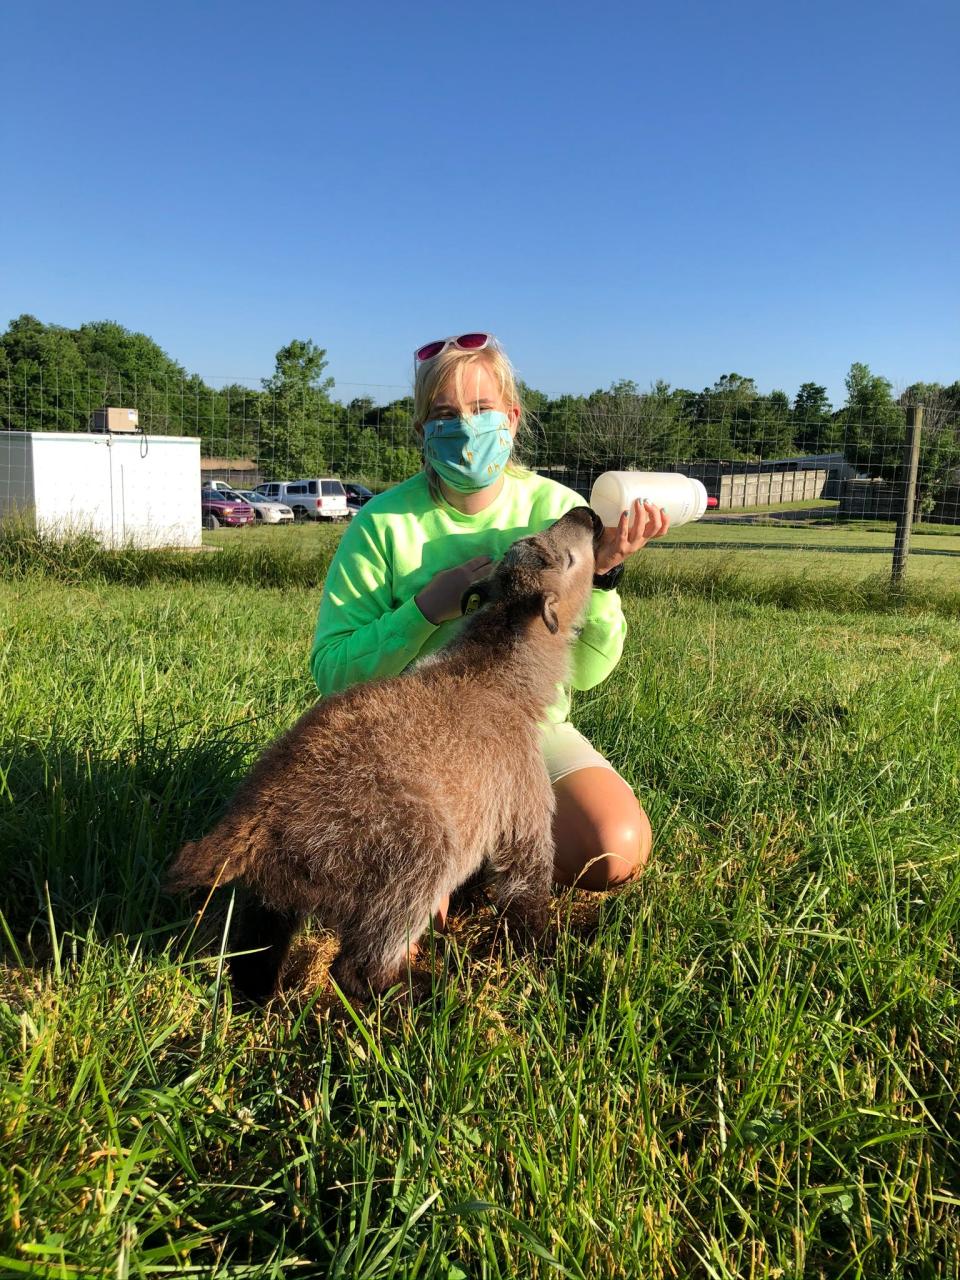 Krystin Smith is registered veterinary technician at The Wilds. Her job involves collecting blood samples, monitoring anesthesia and administering medications, among other things.